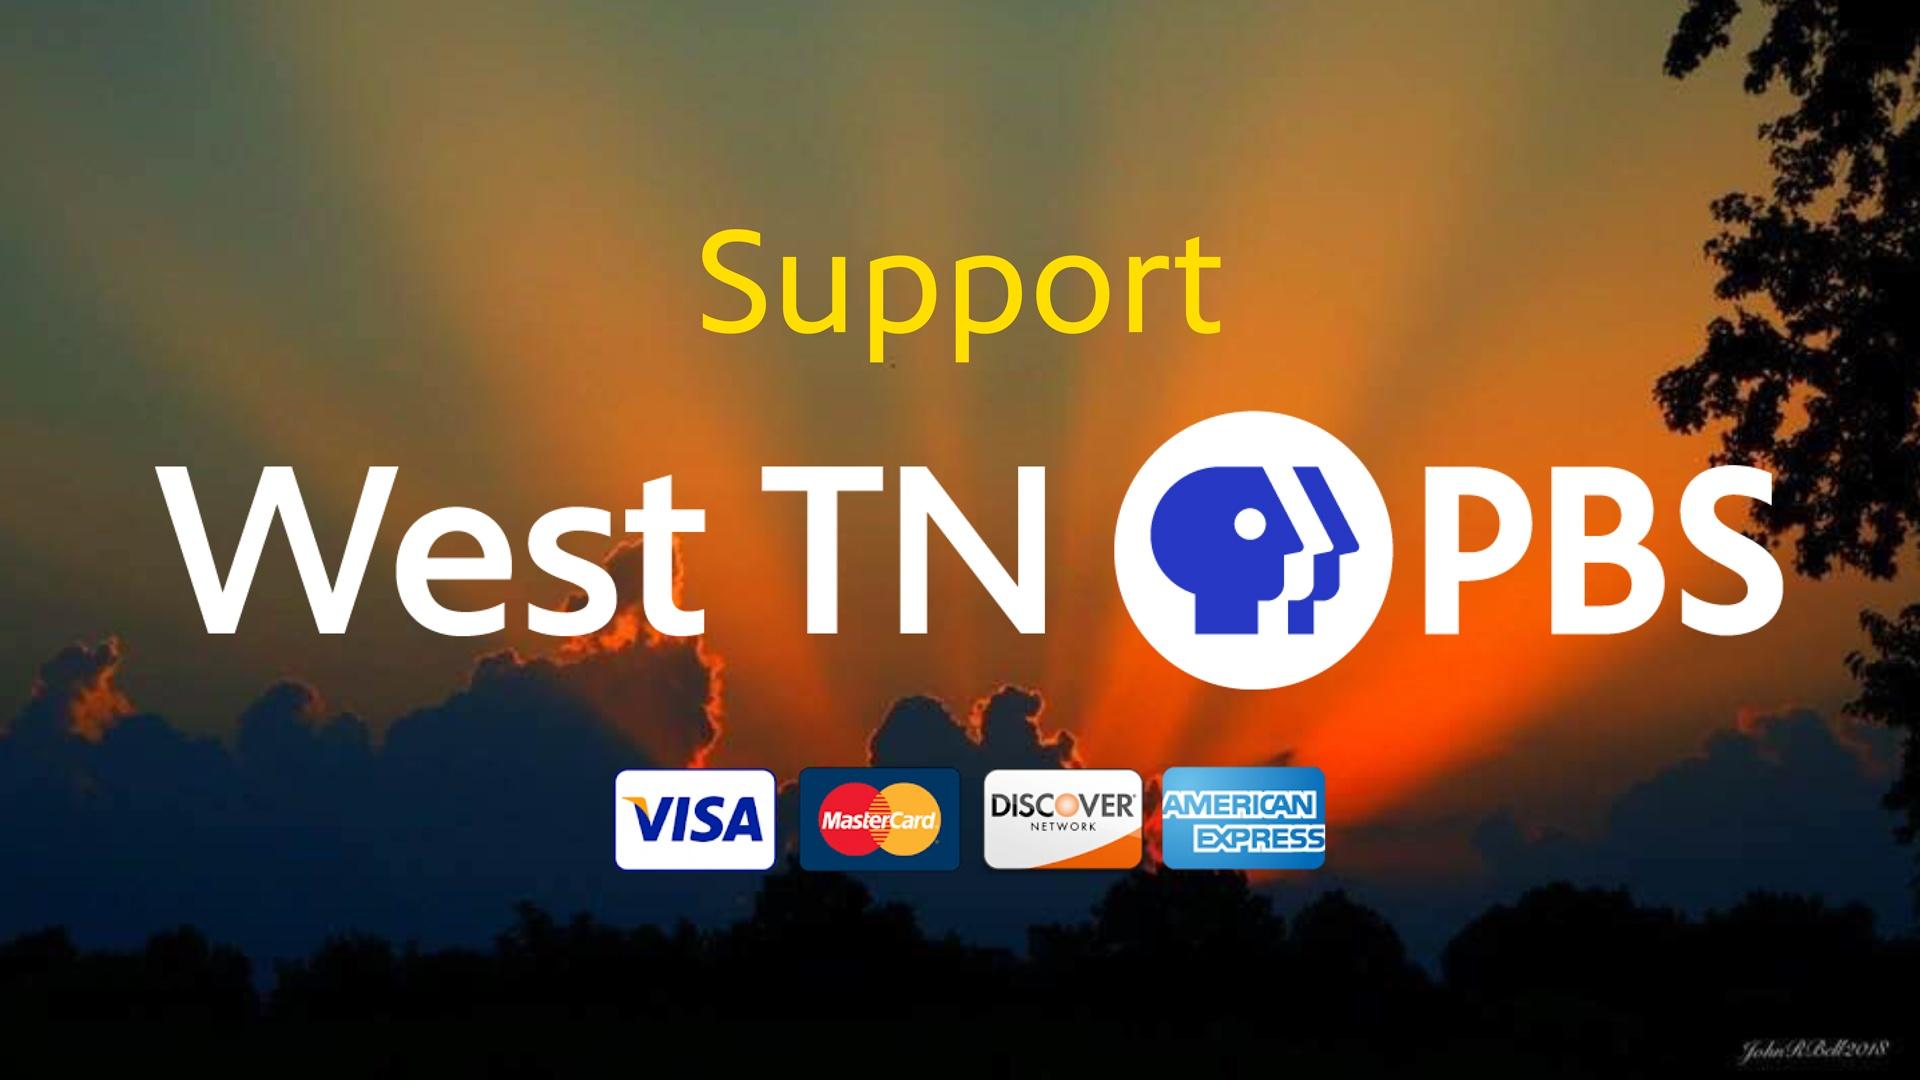 Support West TN PBS